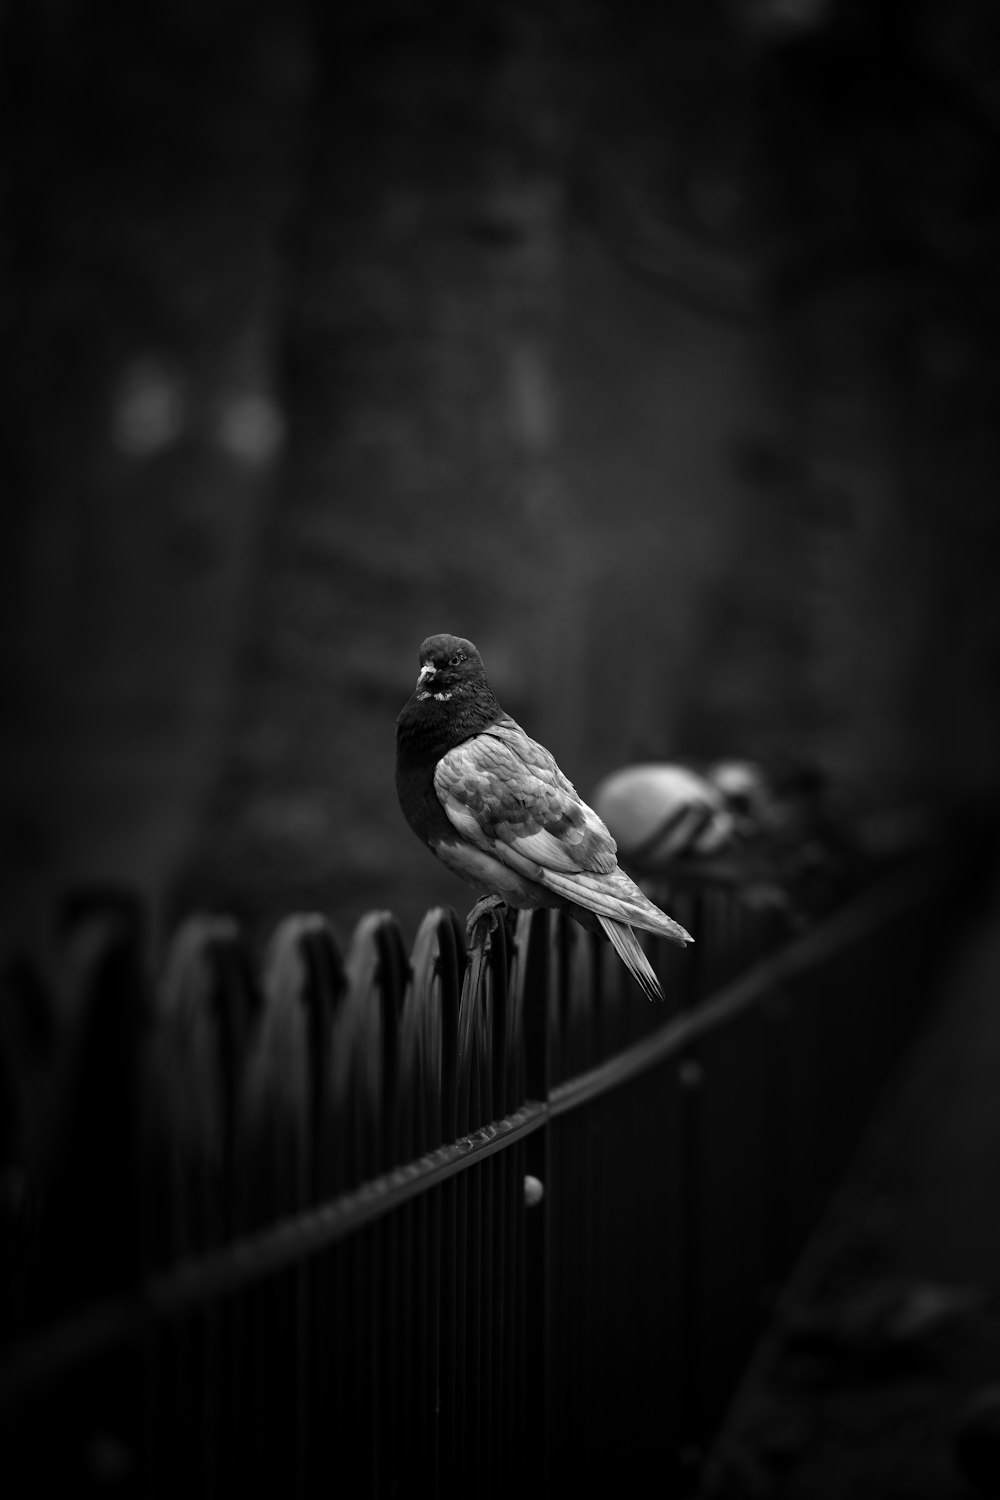 grayscale photo of pigeon on black fence